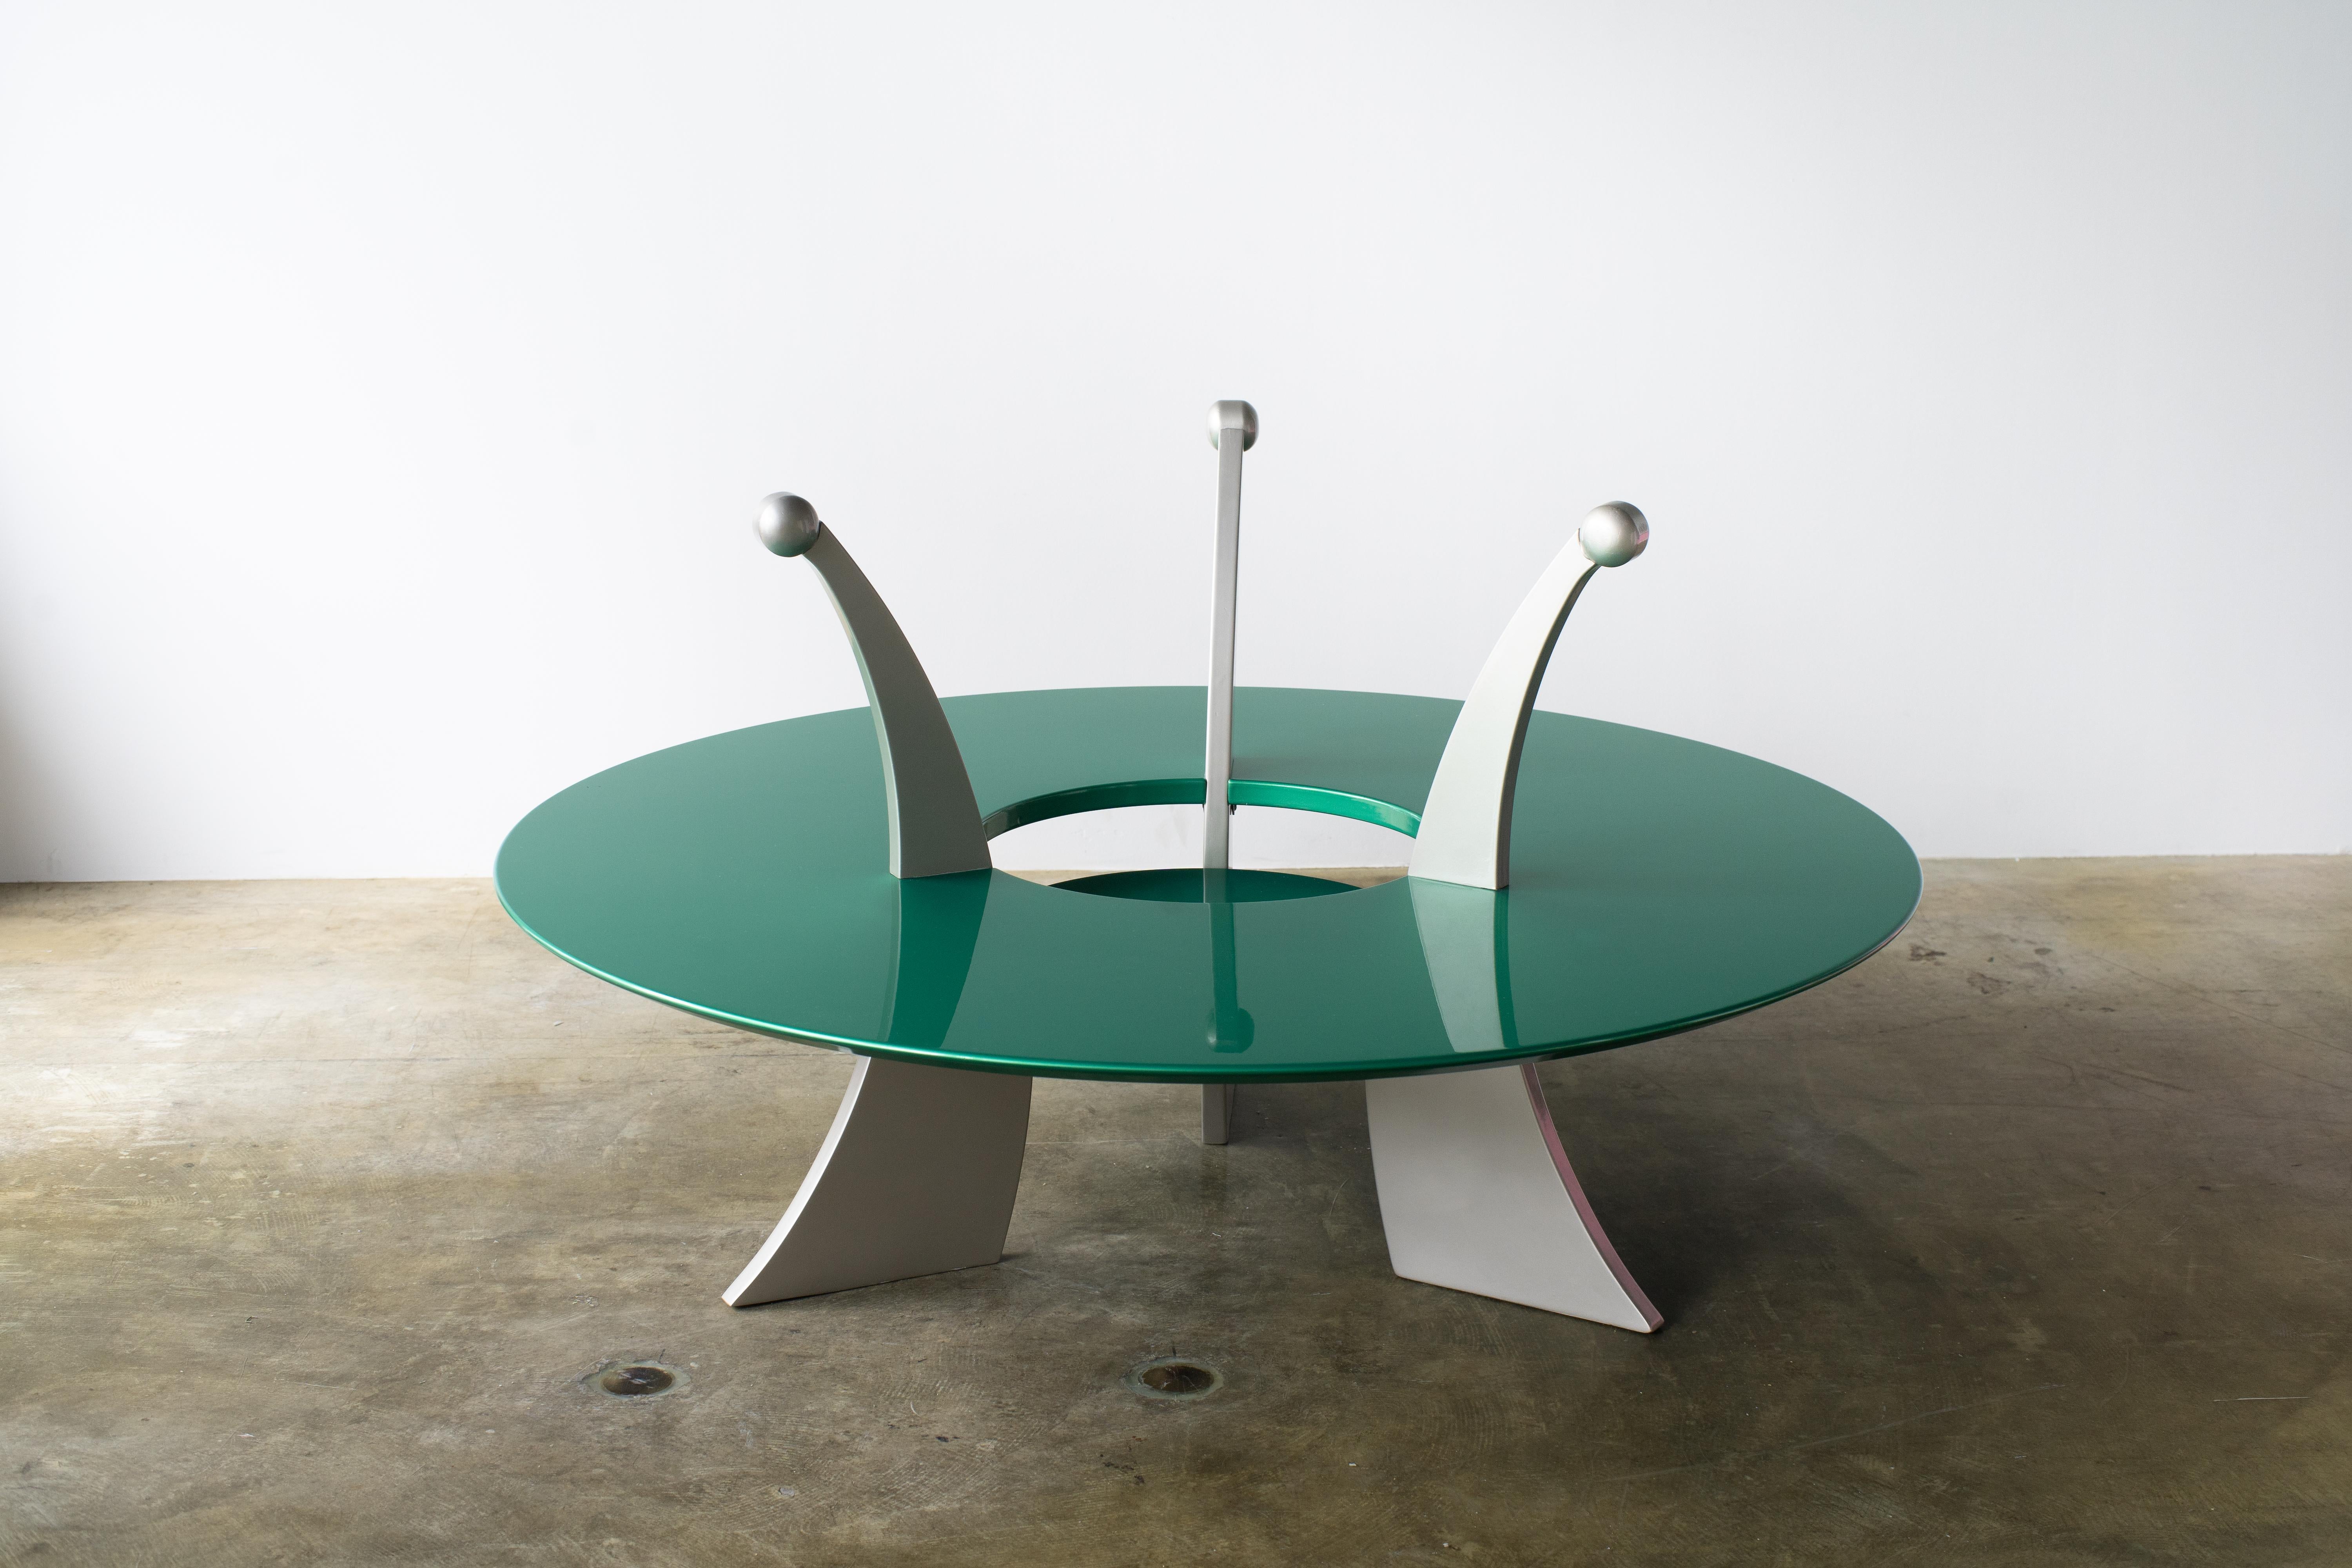 Orchedia coffee table
Designed by Massimo Morozzi for Mazzei. Glitter green and silver.
Repainted and mint condition.
Measures: Table height 36cm/14.2